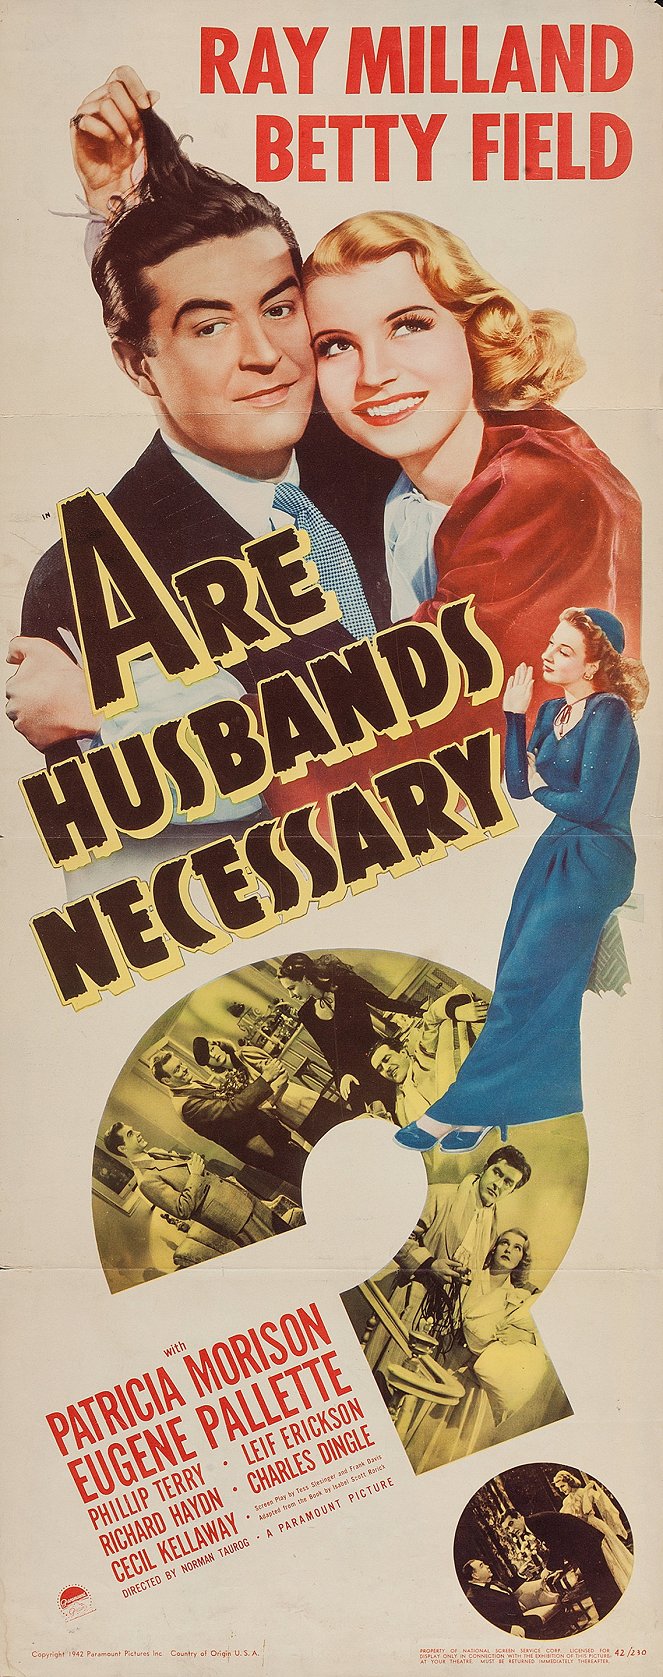 Are Husbands Necessary? - Posters